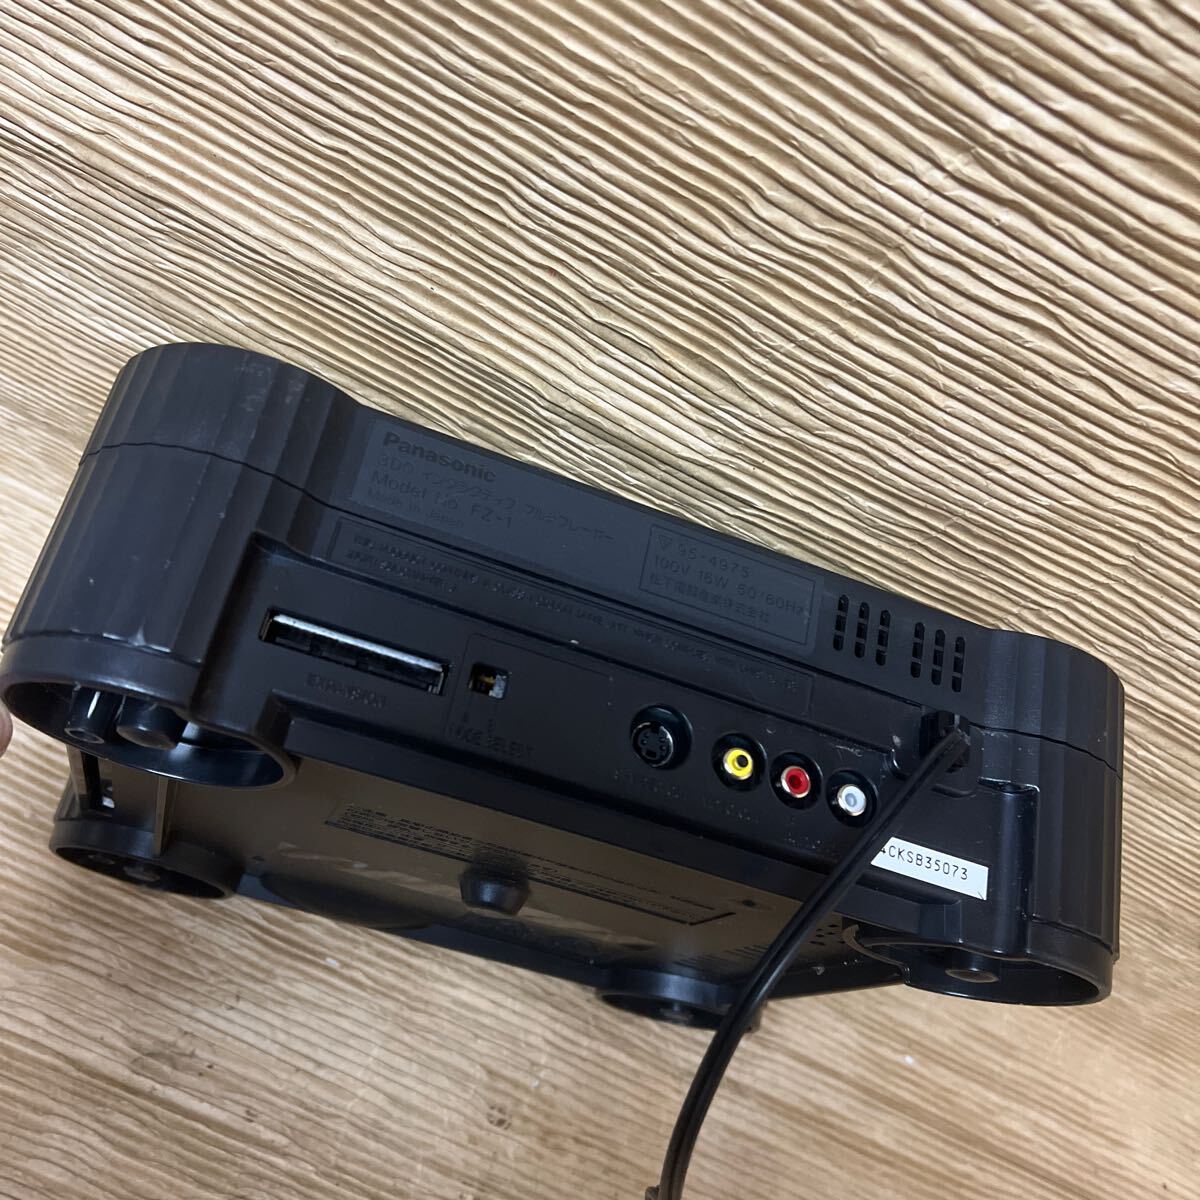 13 Yupack payment on delivery shipping used present condition goods Panasonic 3DO REAL FZ-1 body 